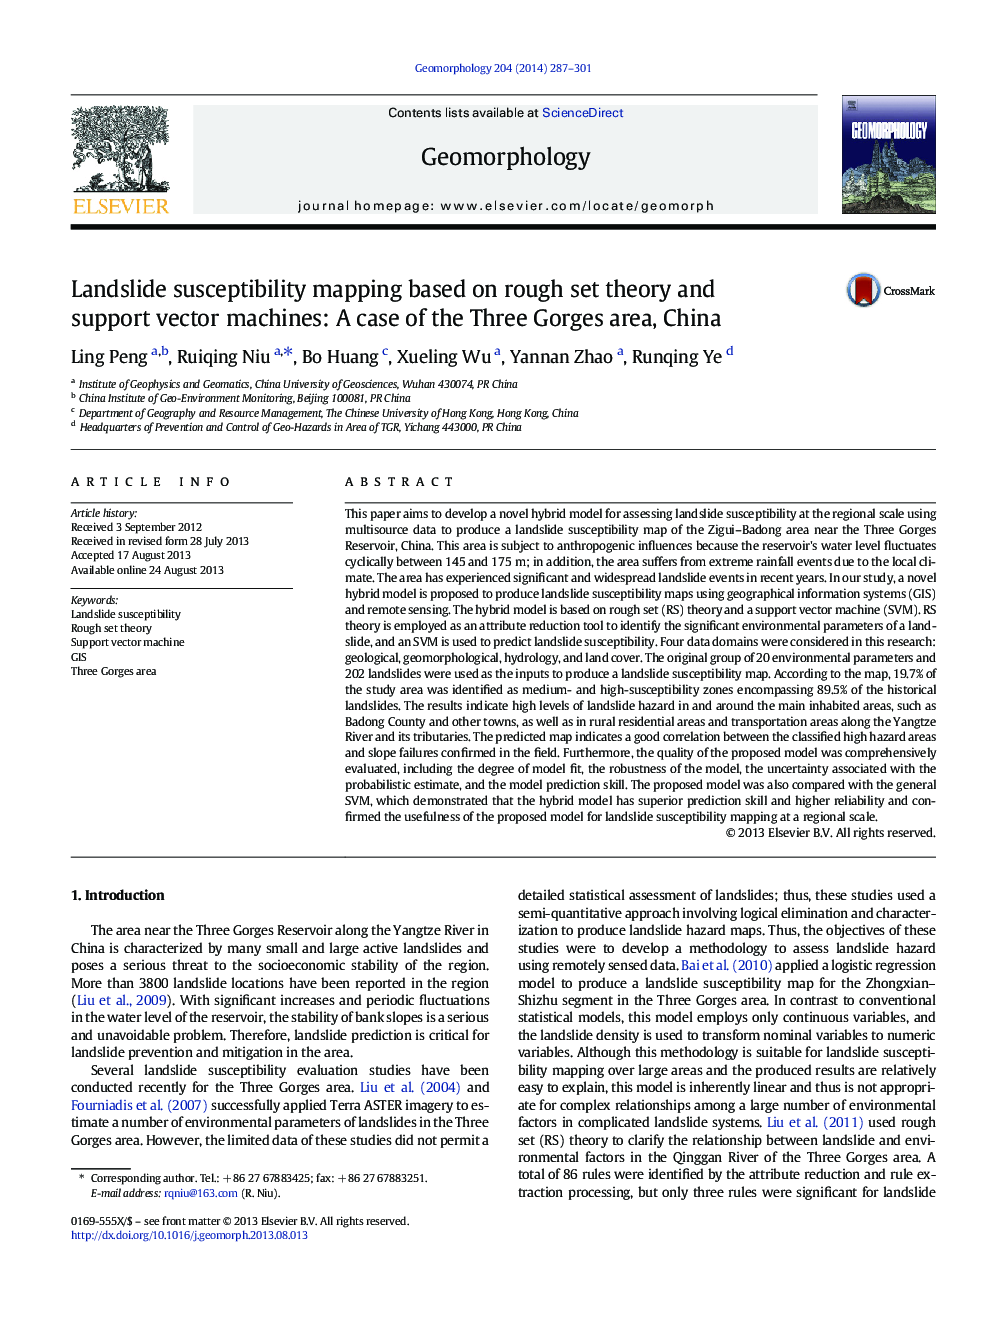 Landslide susceptibility mapping based on rough set theory and support vector machines: A case of the Three Gorges area, China